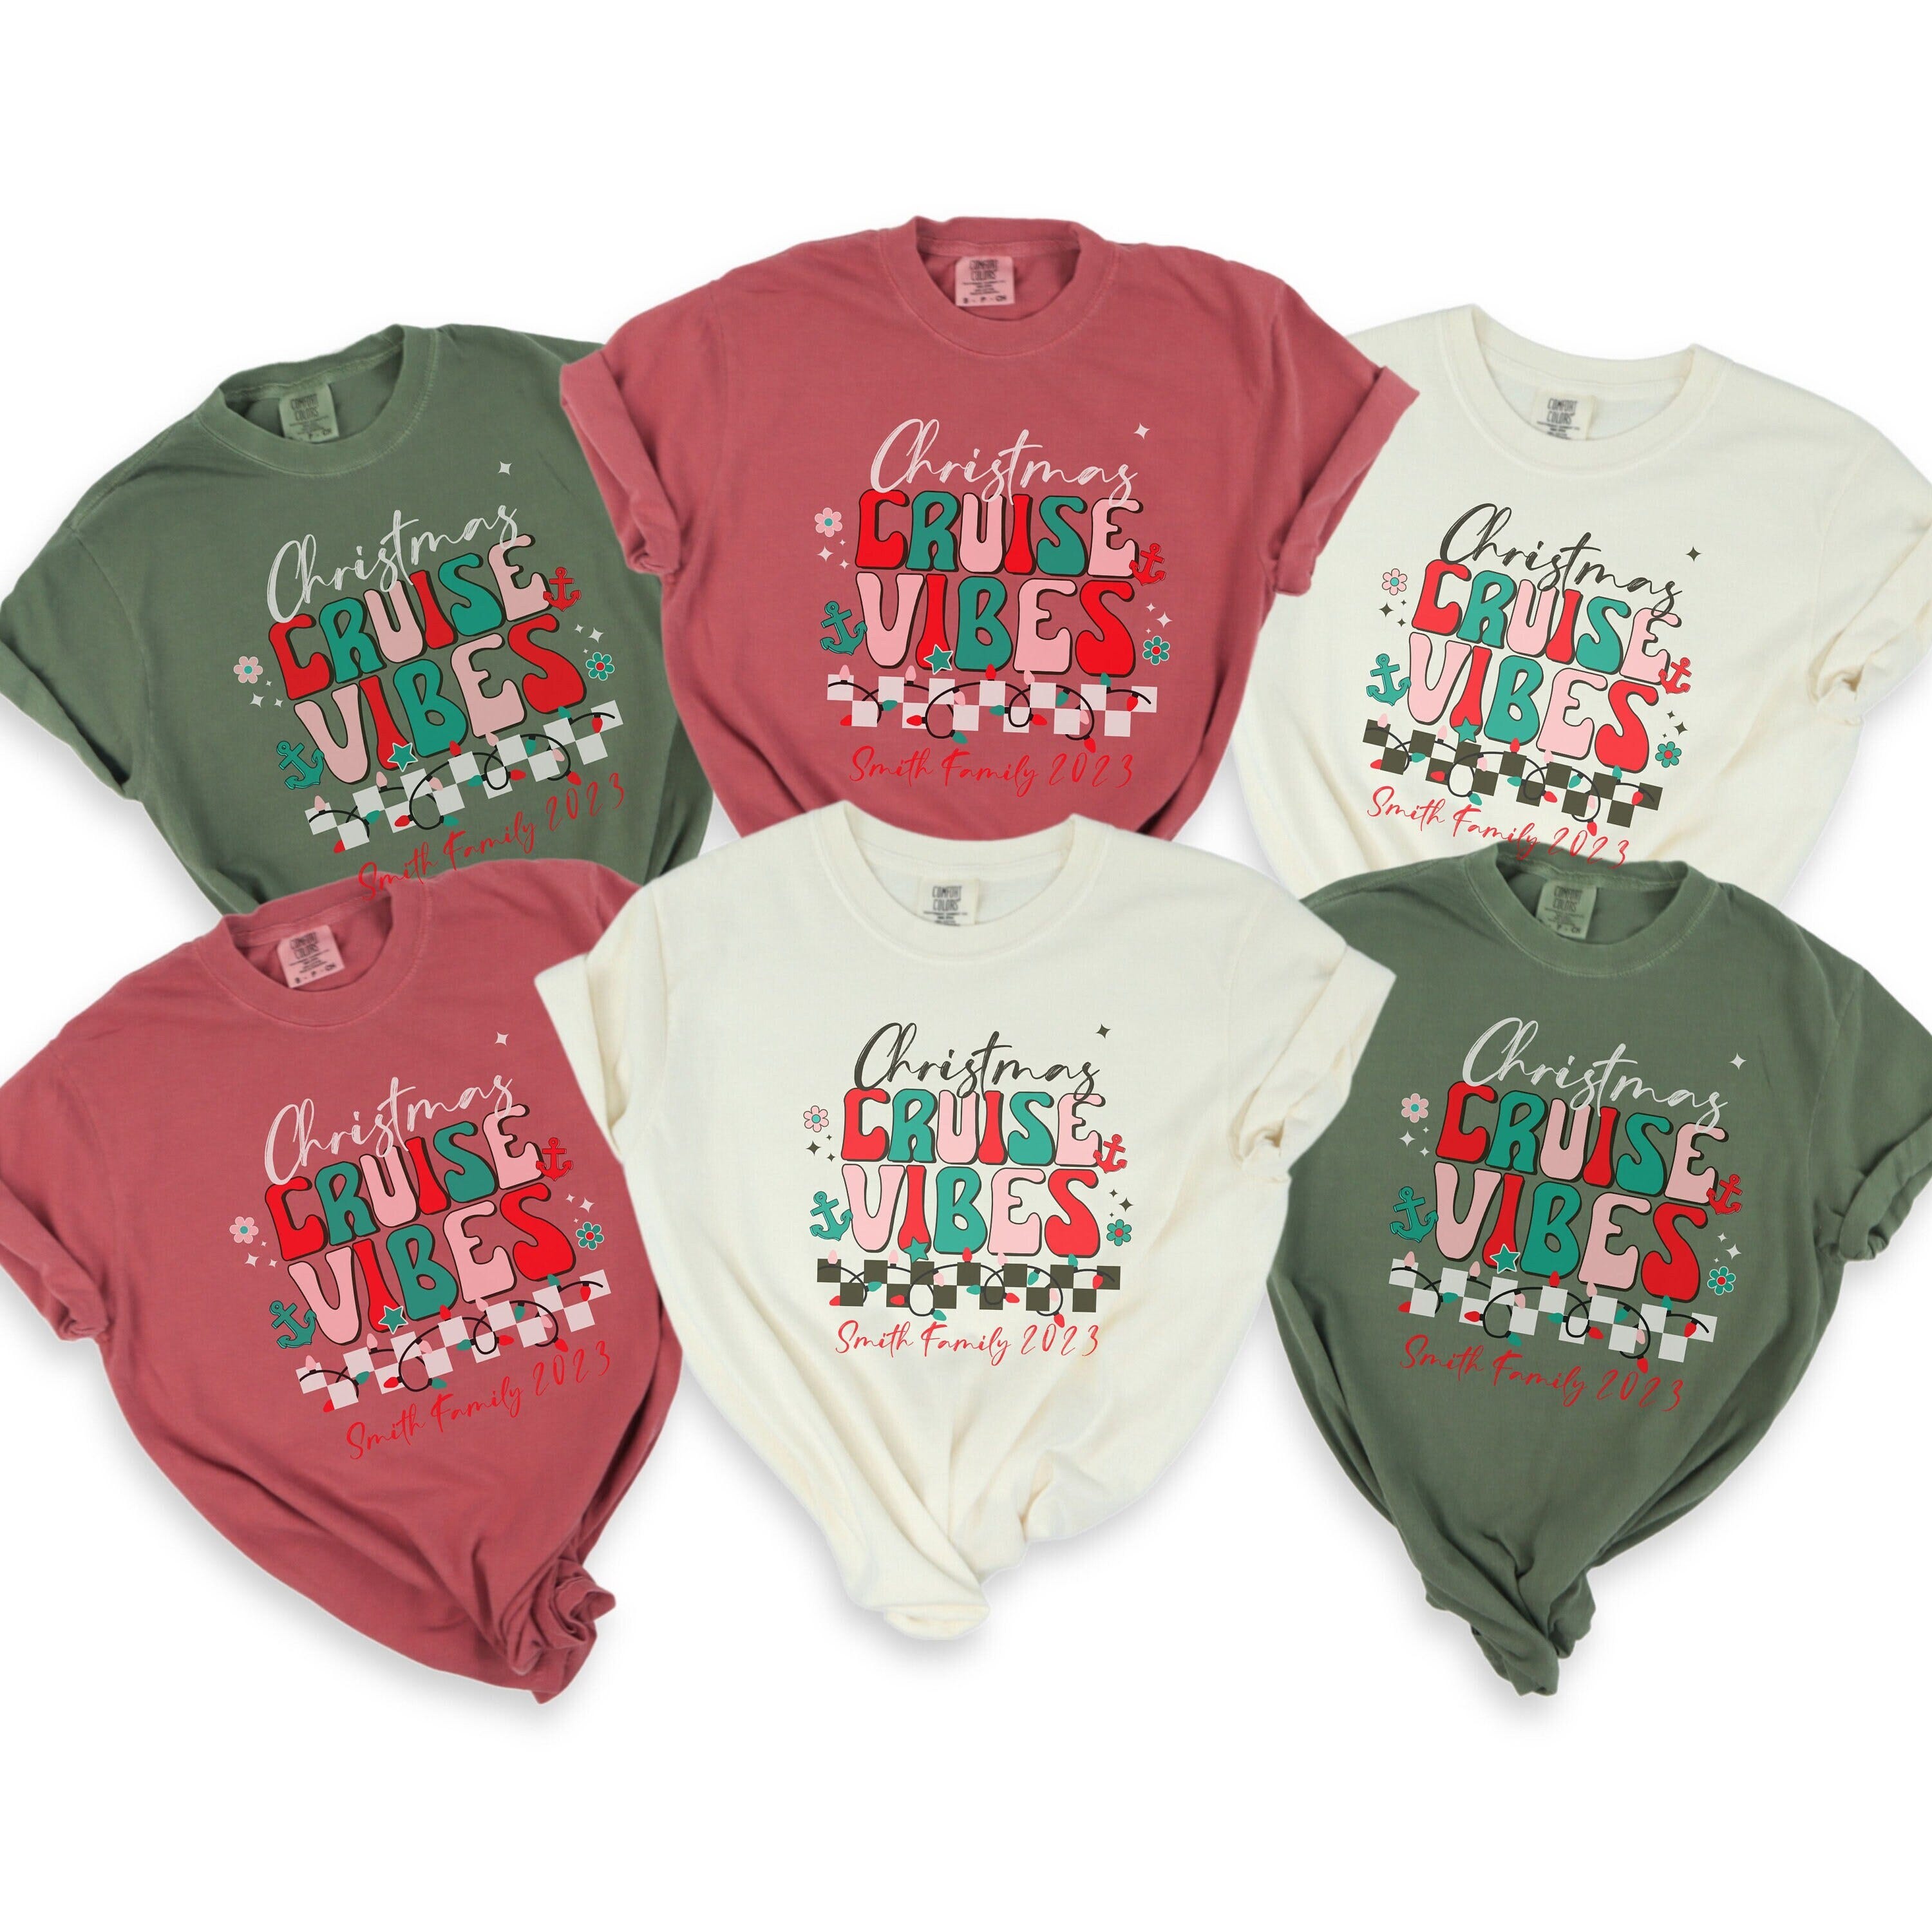 Christmas cruise shirts for family matching group t-shirts Custom cruise Christmas tee group matching shirt Christmas vacation cruise trip